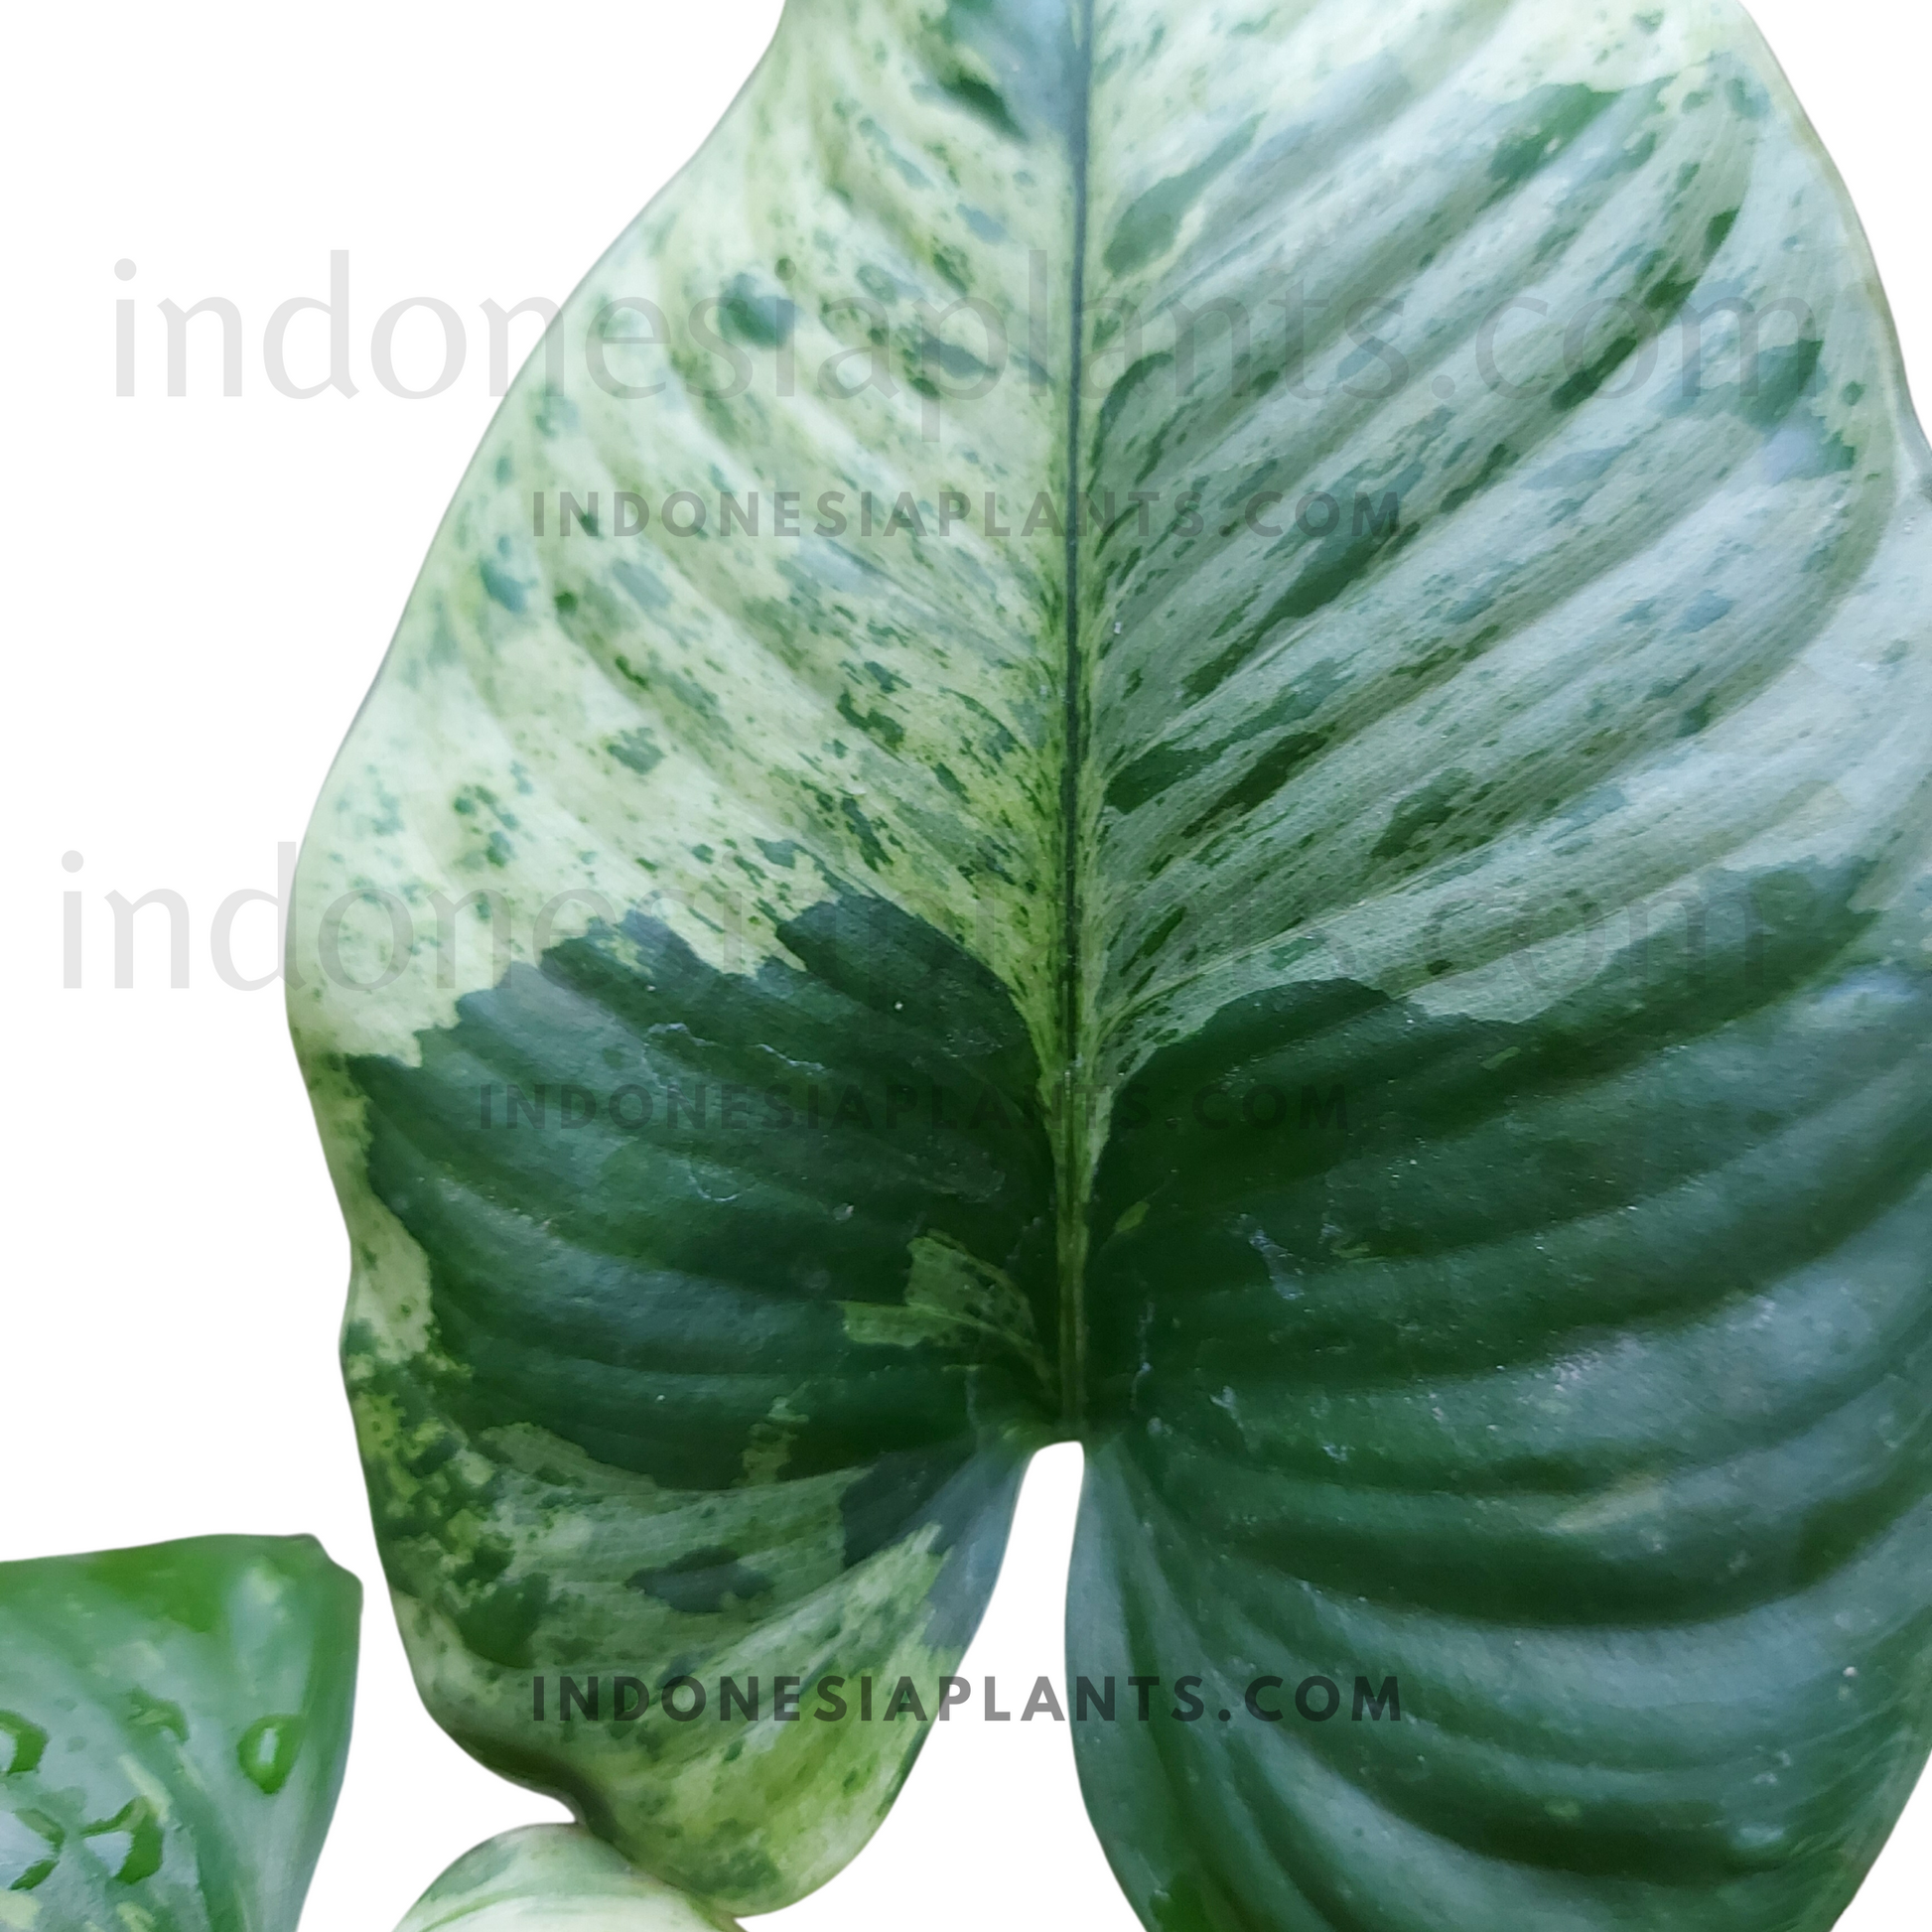 homalomena plant this is homalomena variegated originated from Indonesia. Main color is green with white variegation.